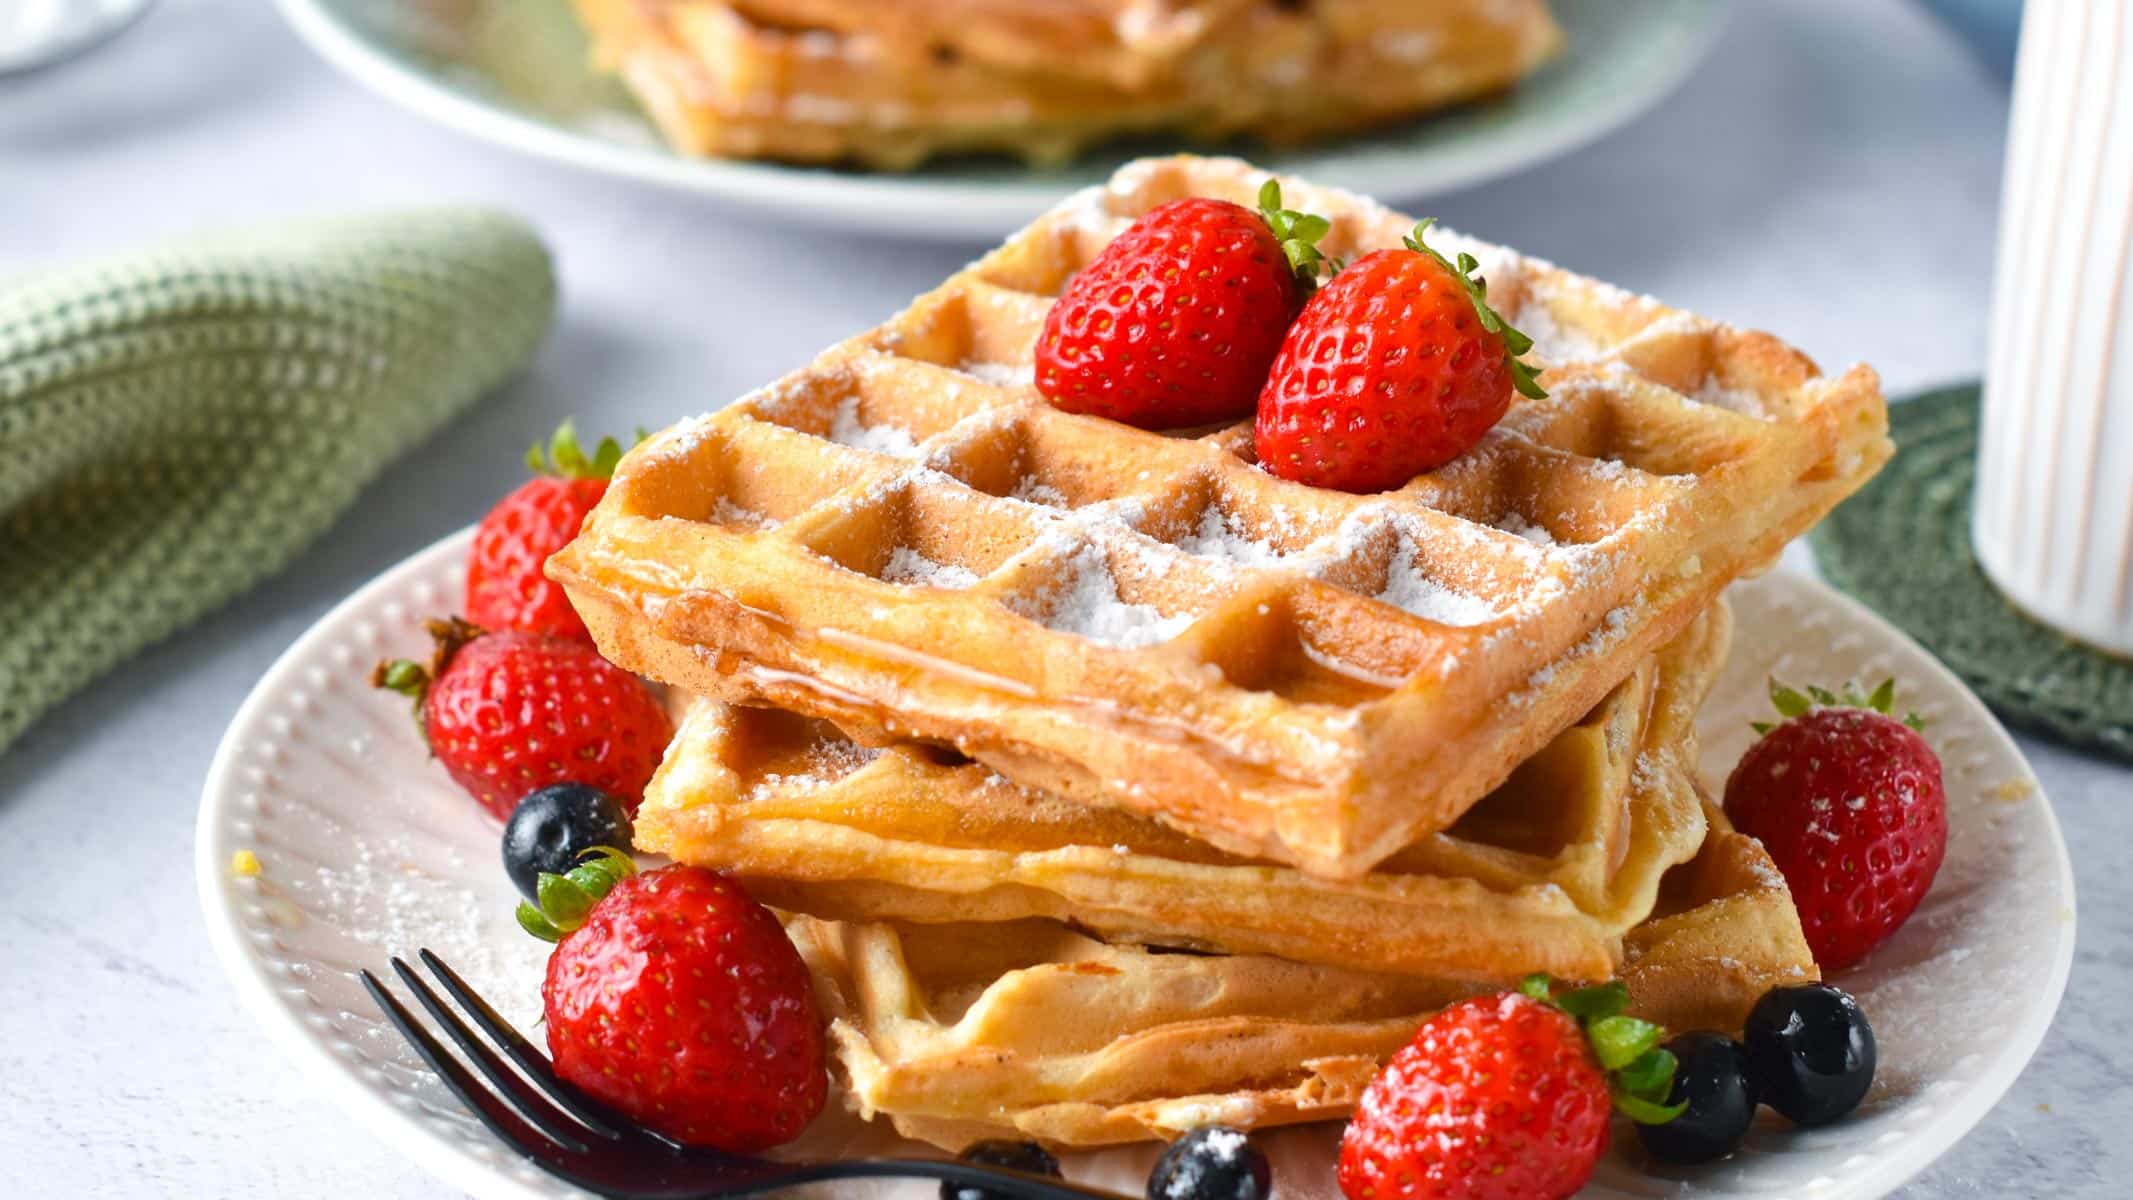 These Dairy Free Waffles are easy homemade waffles made with no milk or butter. They are light, crispy, and fluffy in the center and perfect as a comforting breakfast on the weekend.